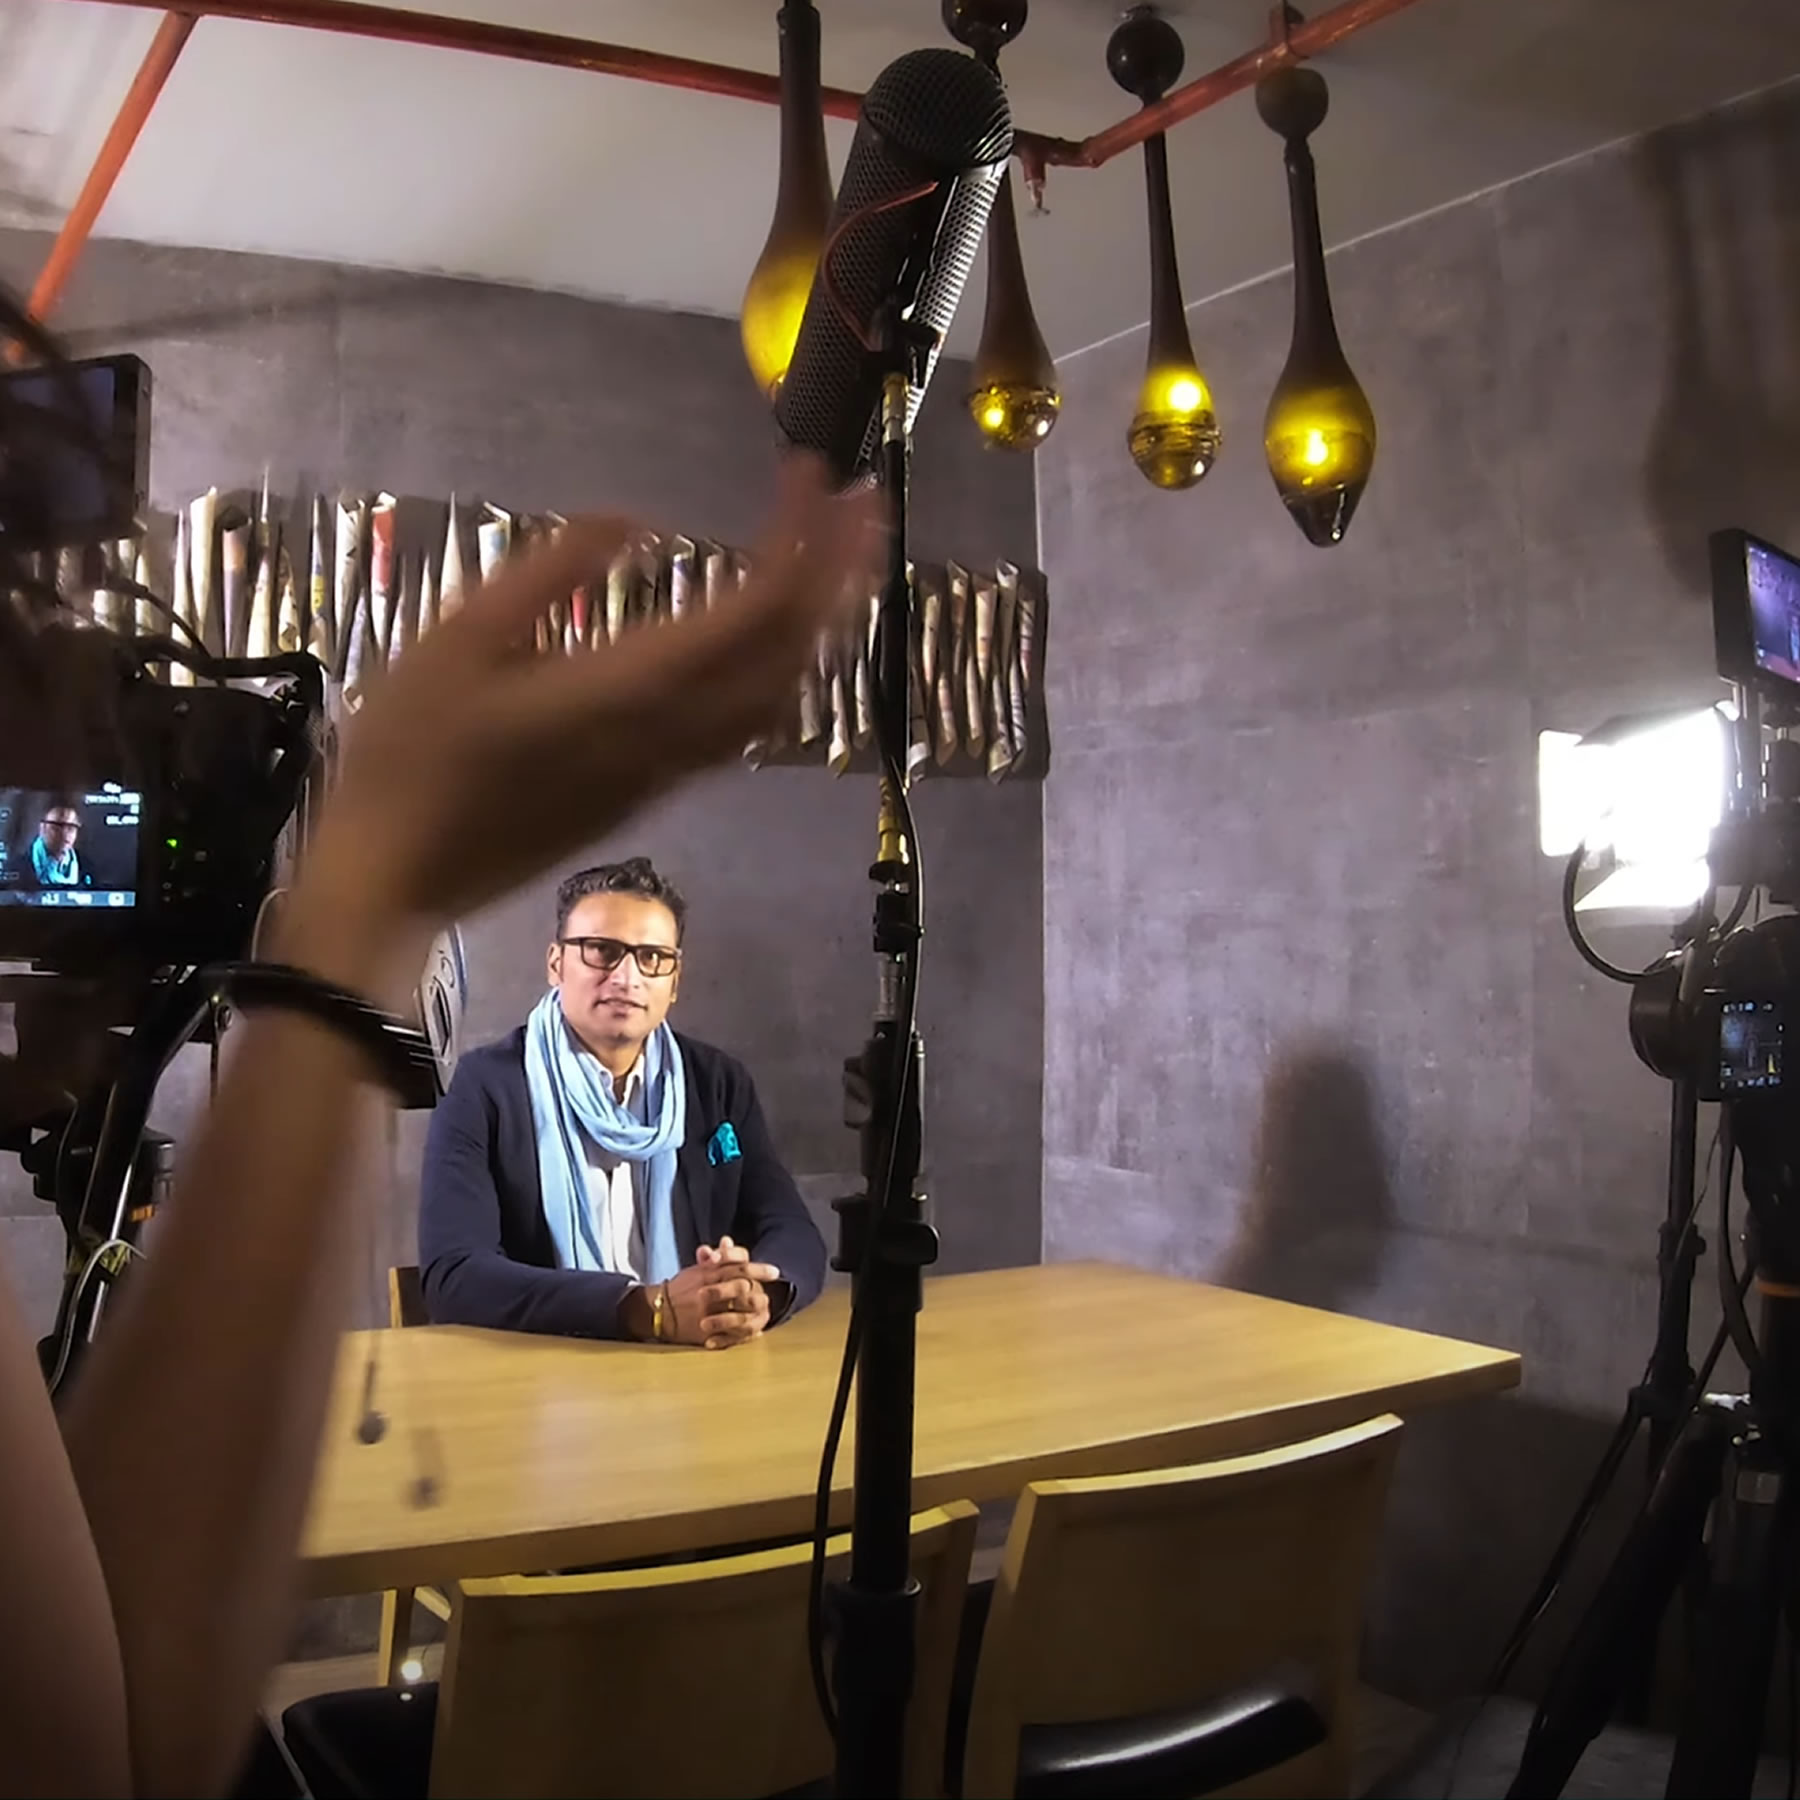 snapshot from a recording video interview with a designer